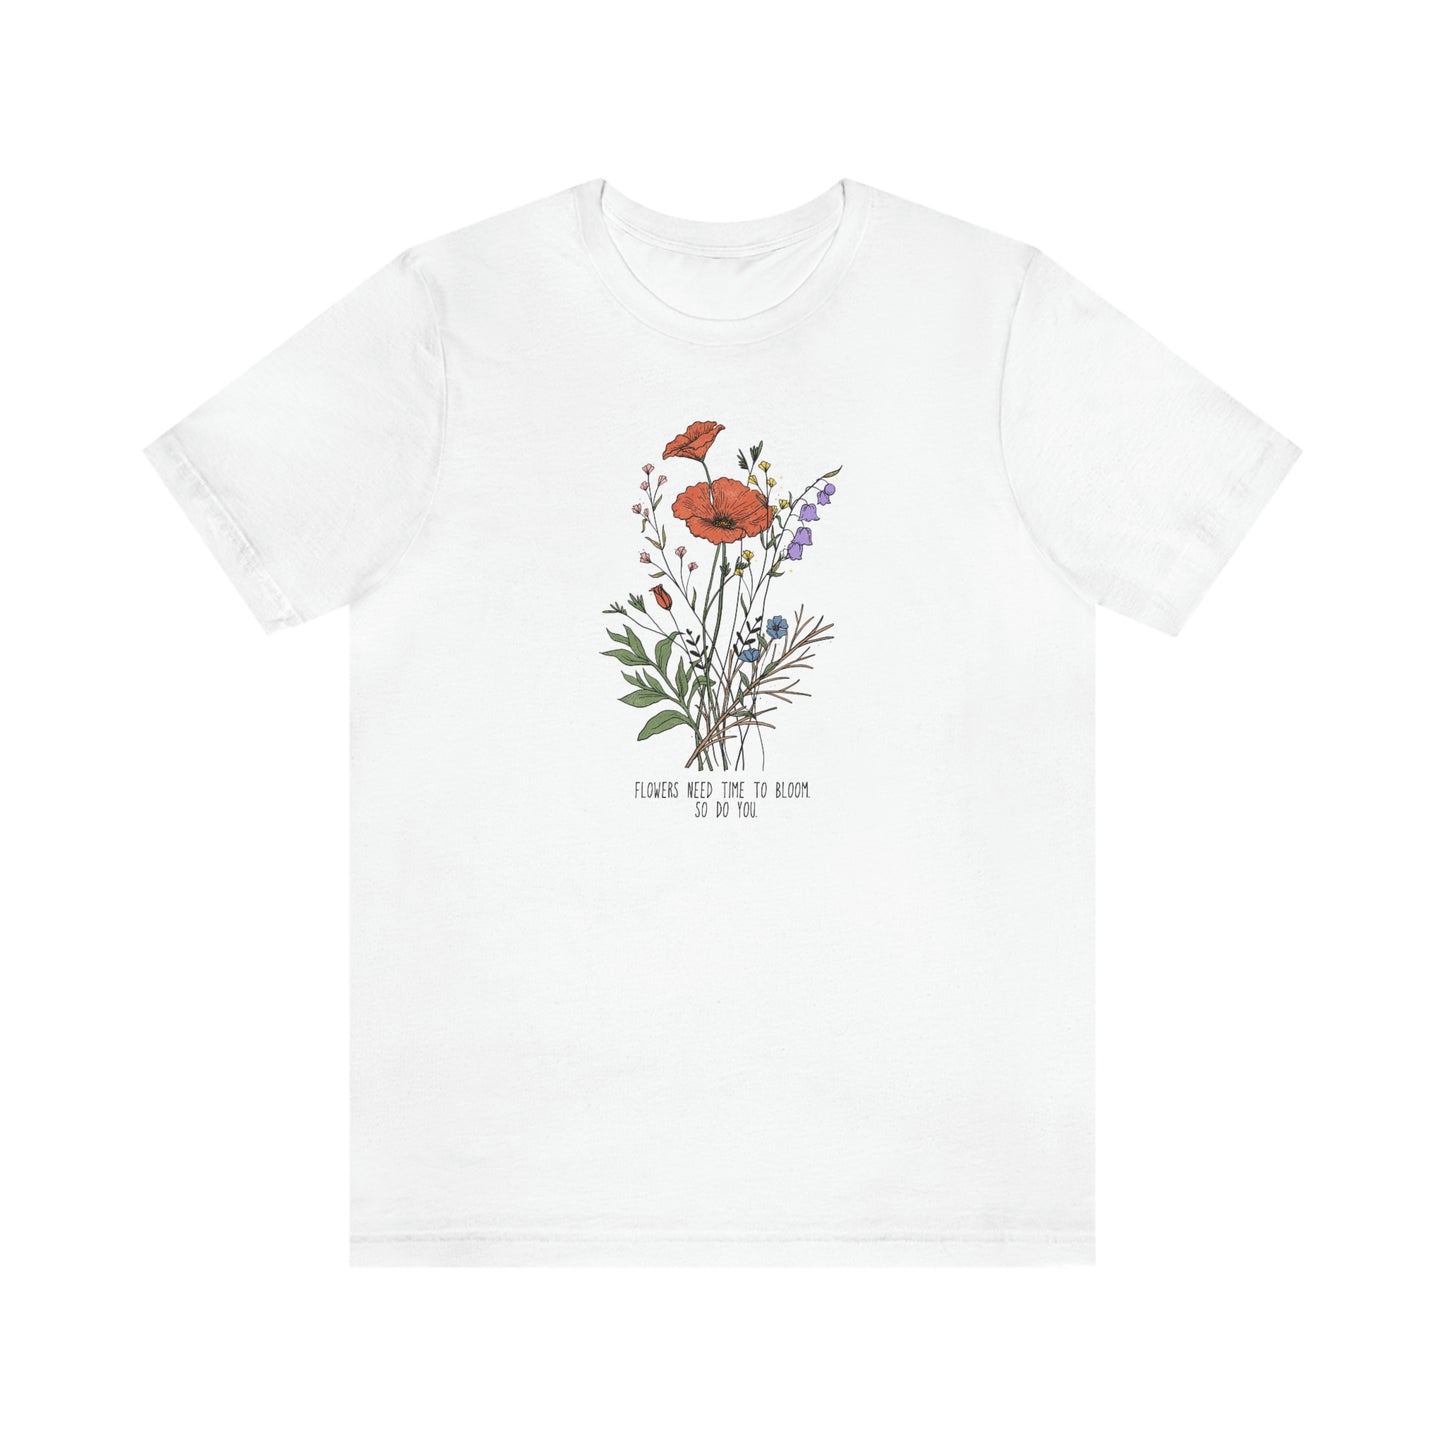 Flowers Need Time To Bloom So Do You T-Shirt